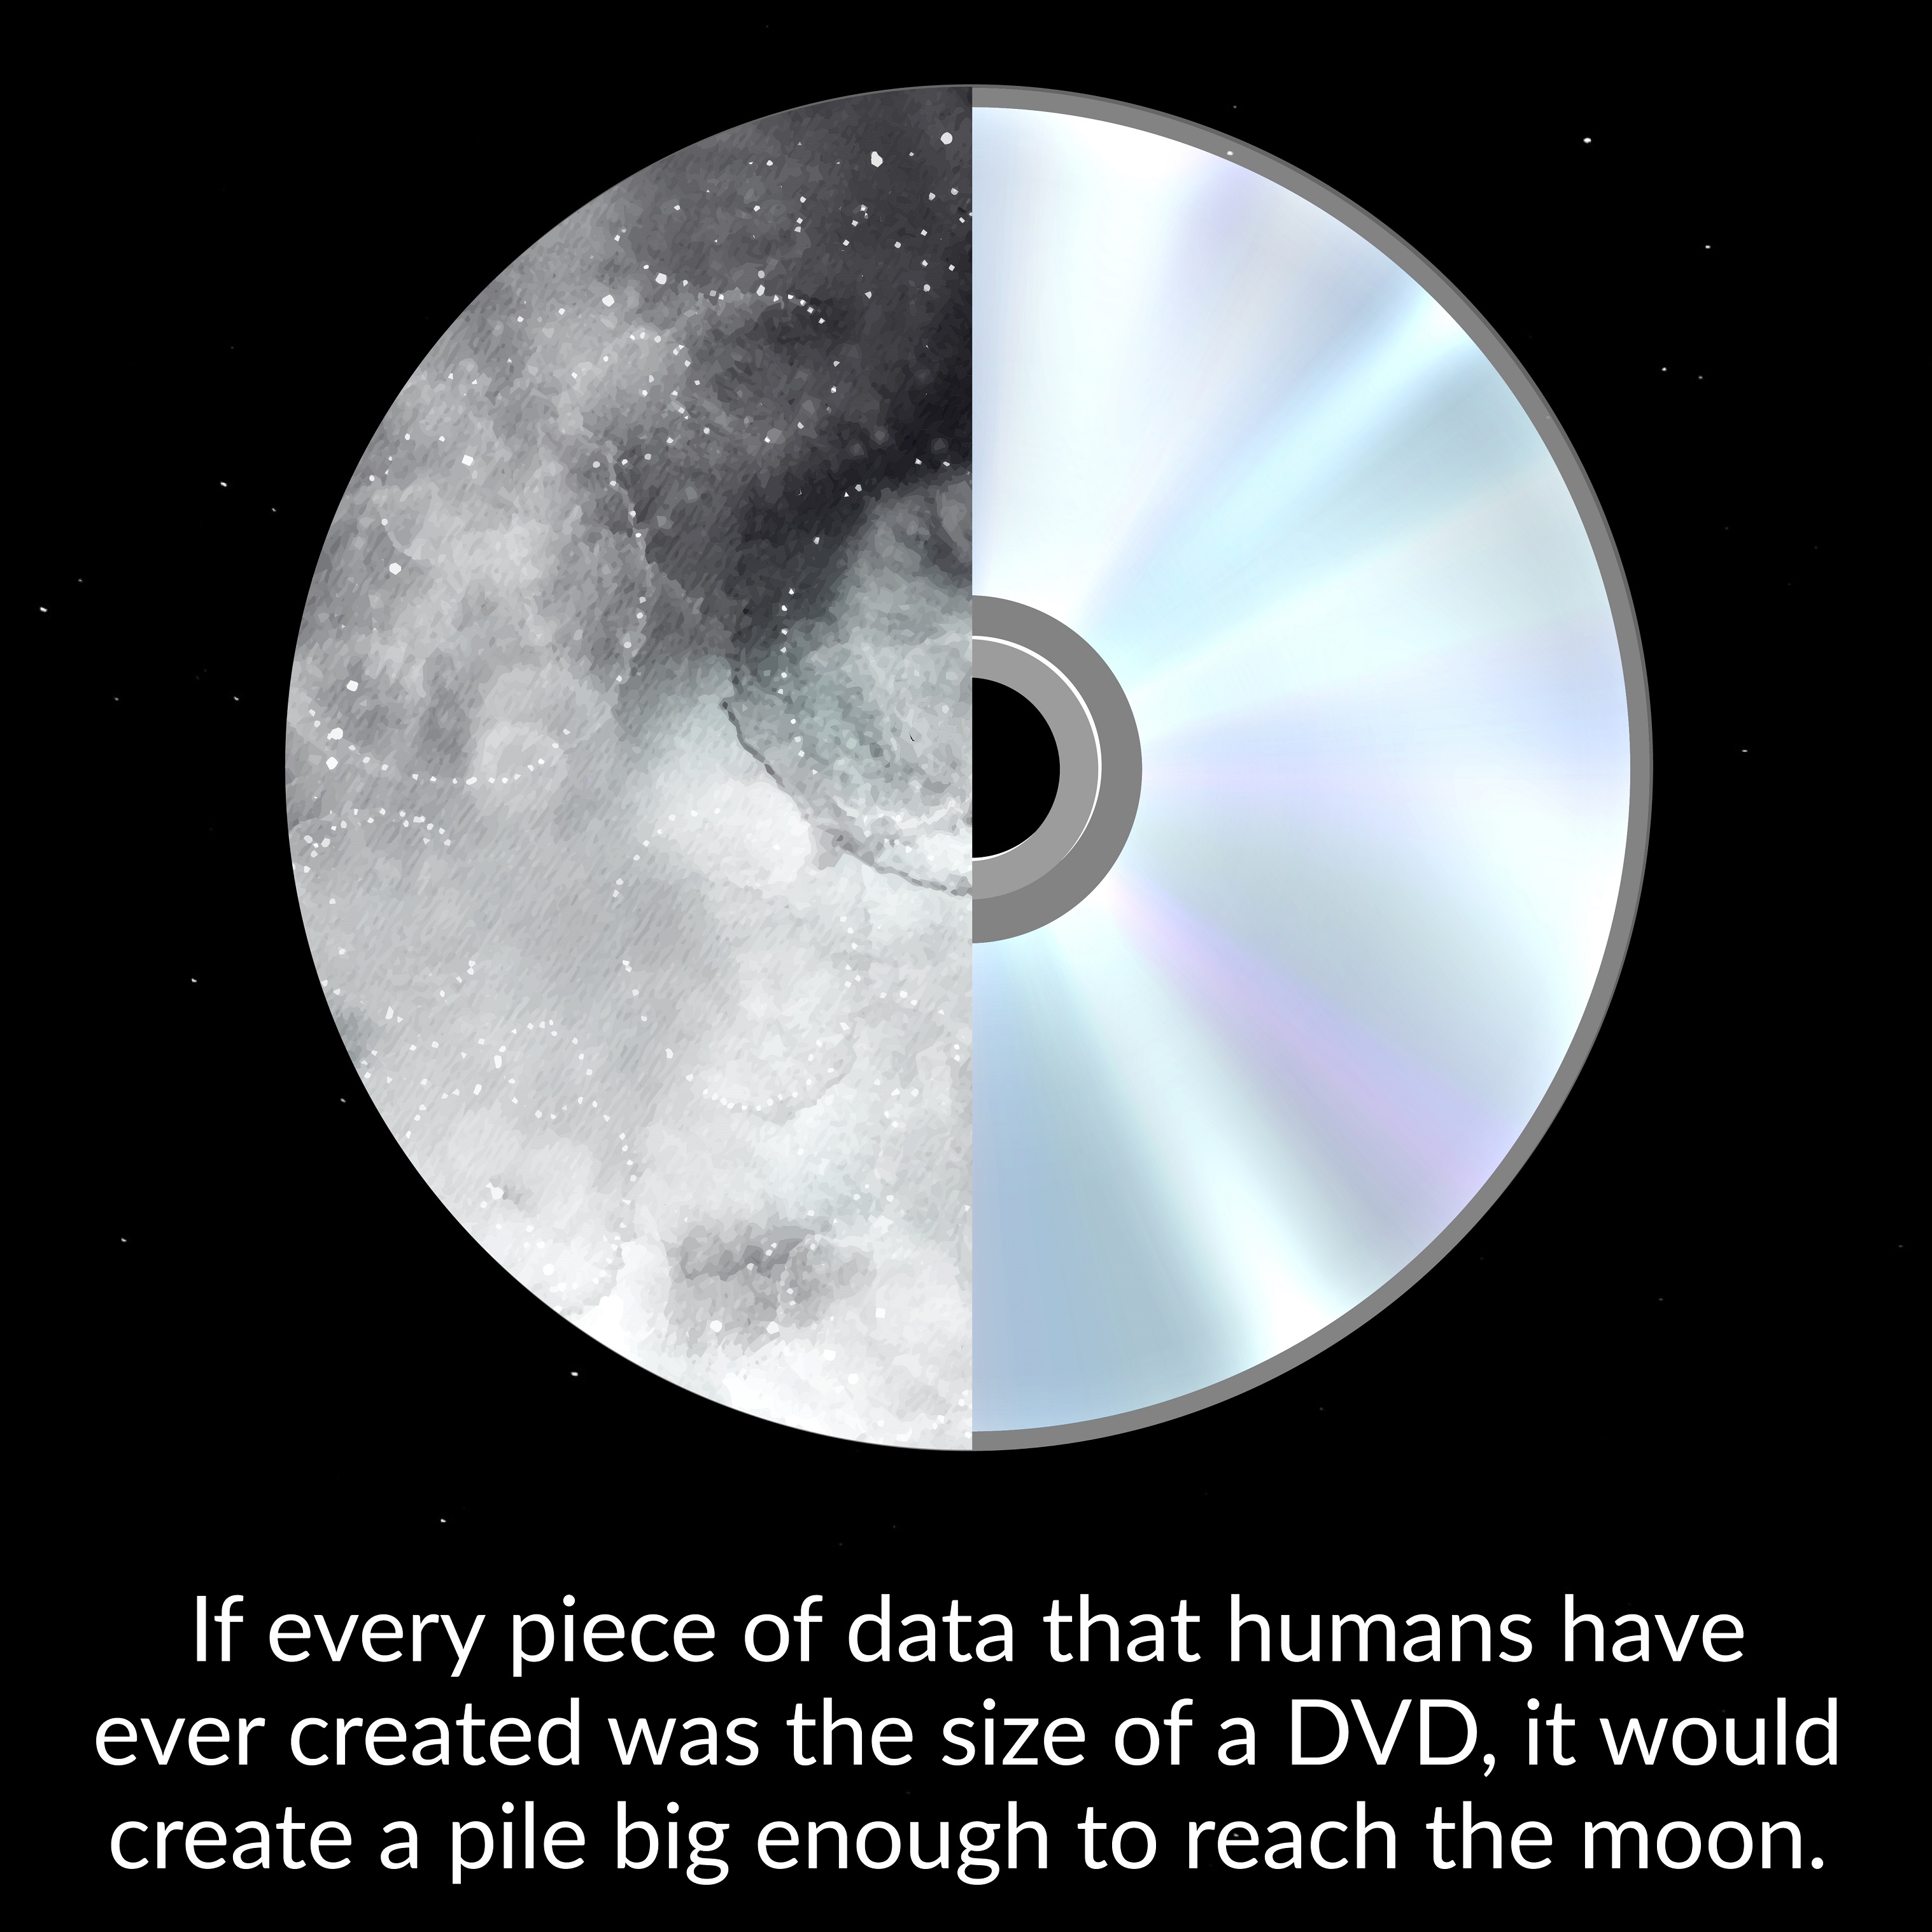 If each piece of data that humans create everyday was a DVD, it would make a pile high enough to reach the moon.